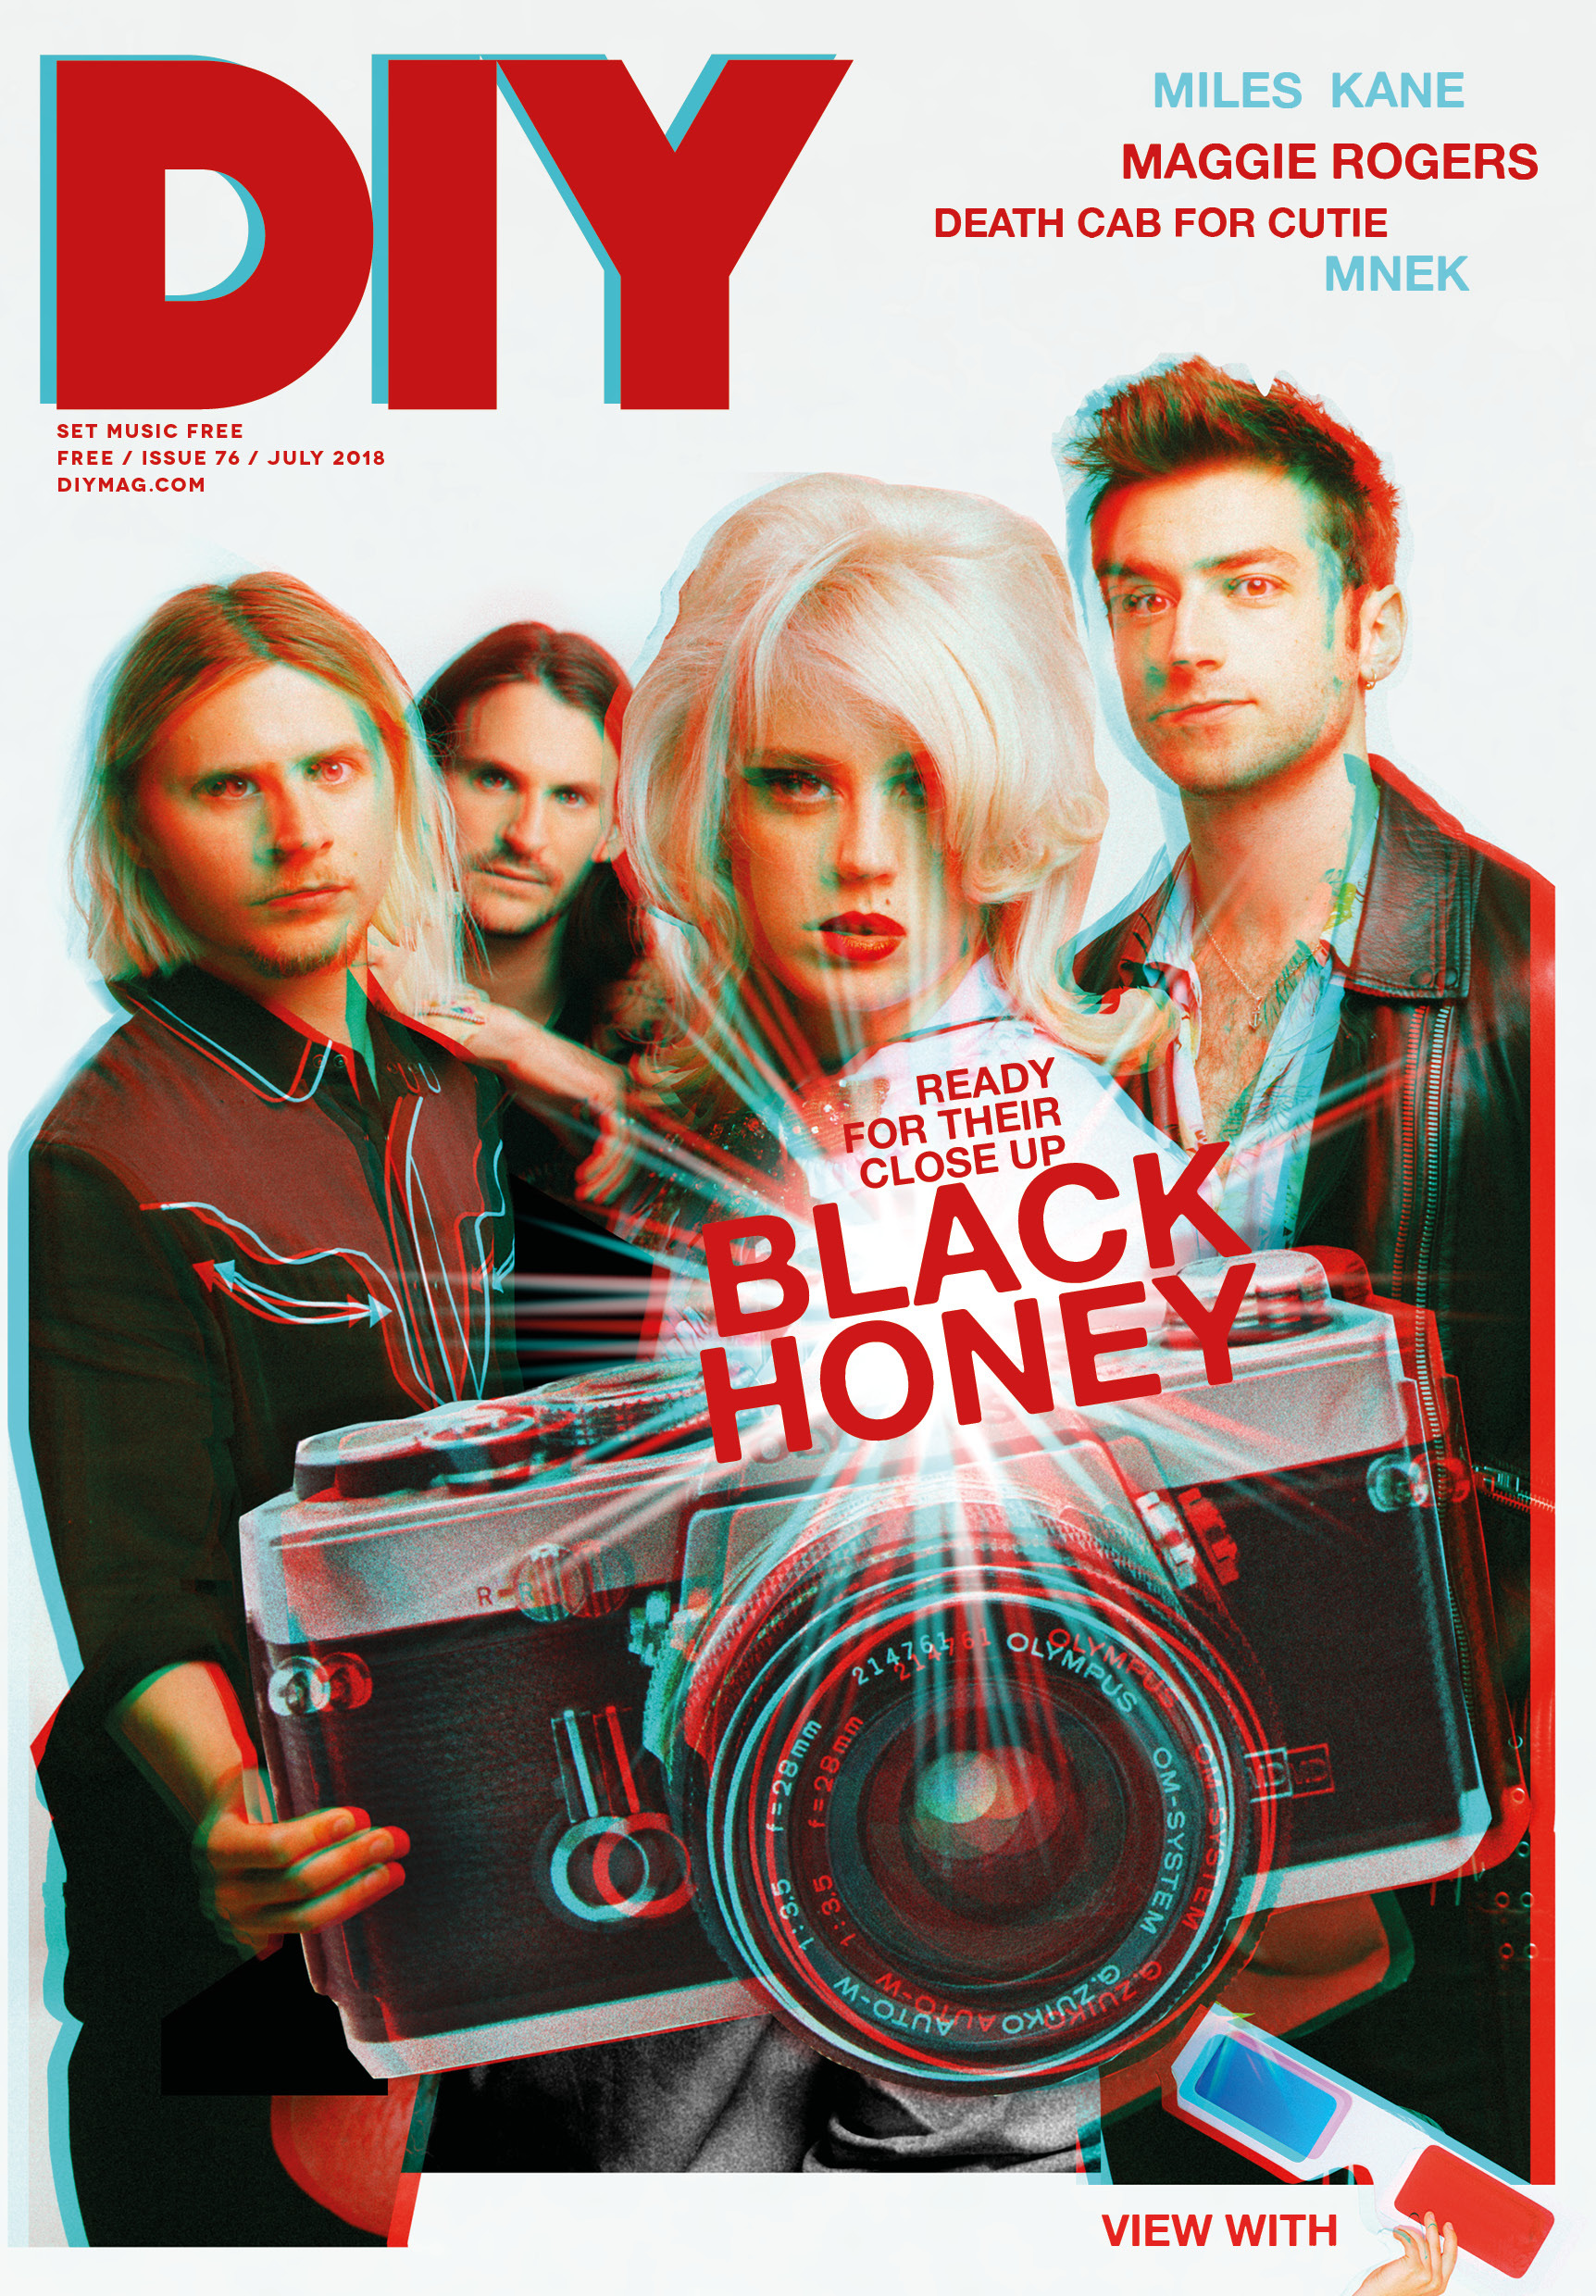 Black Honey, MNEK, Maggie Rogers, Death Cab For Cutie, Miles Kane & more - it's the July issue of DIY!